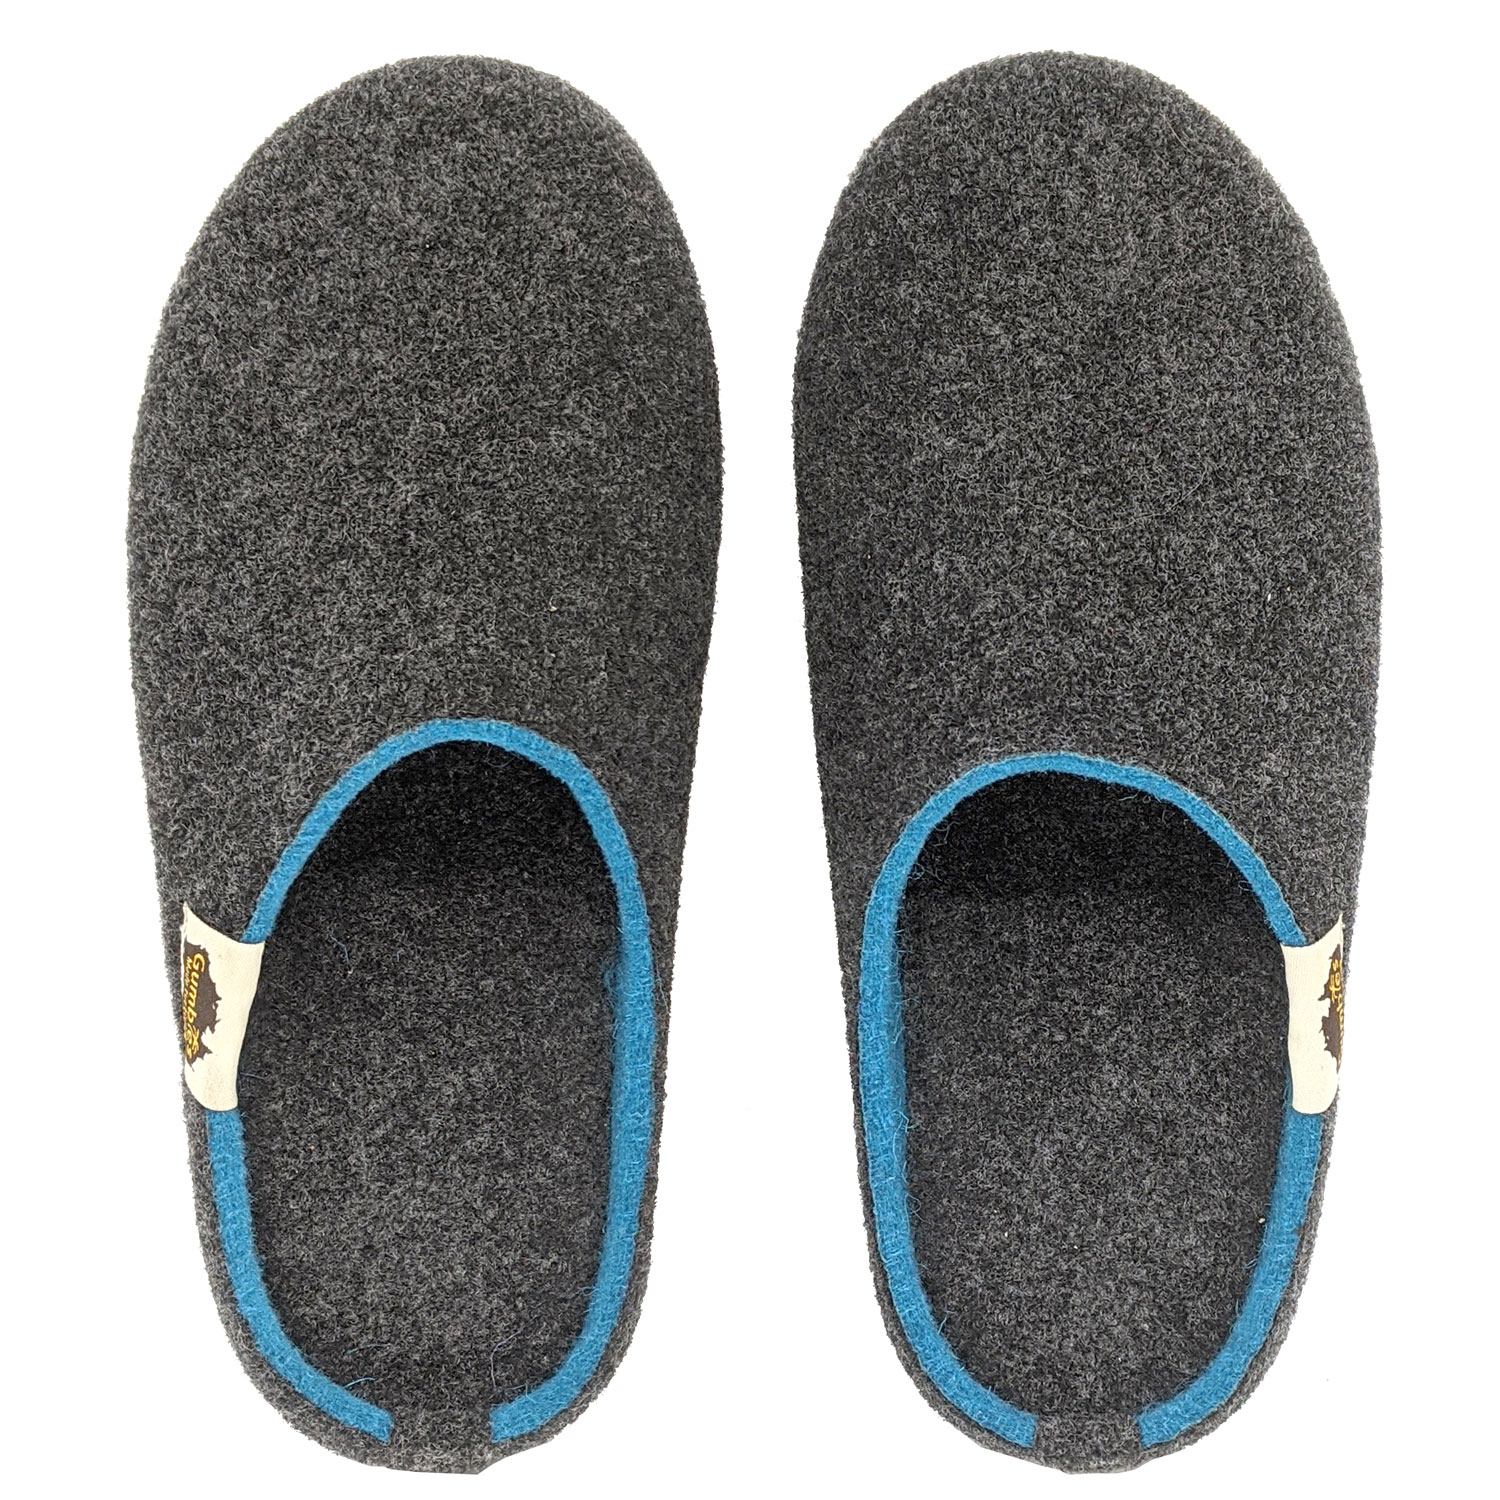 GUMBIES – Outback Slipper, CHARCOAL-TURQUOISE 